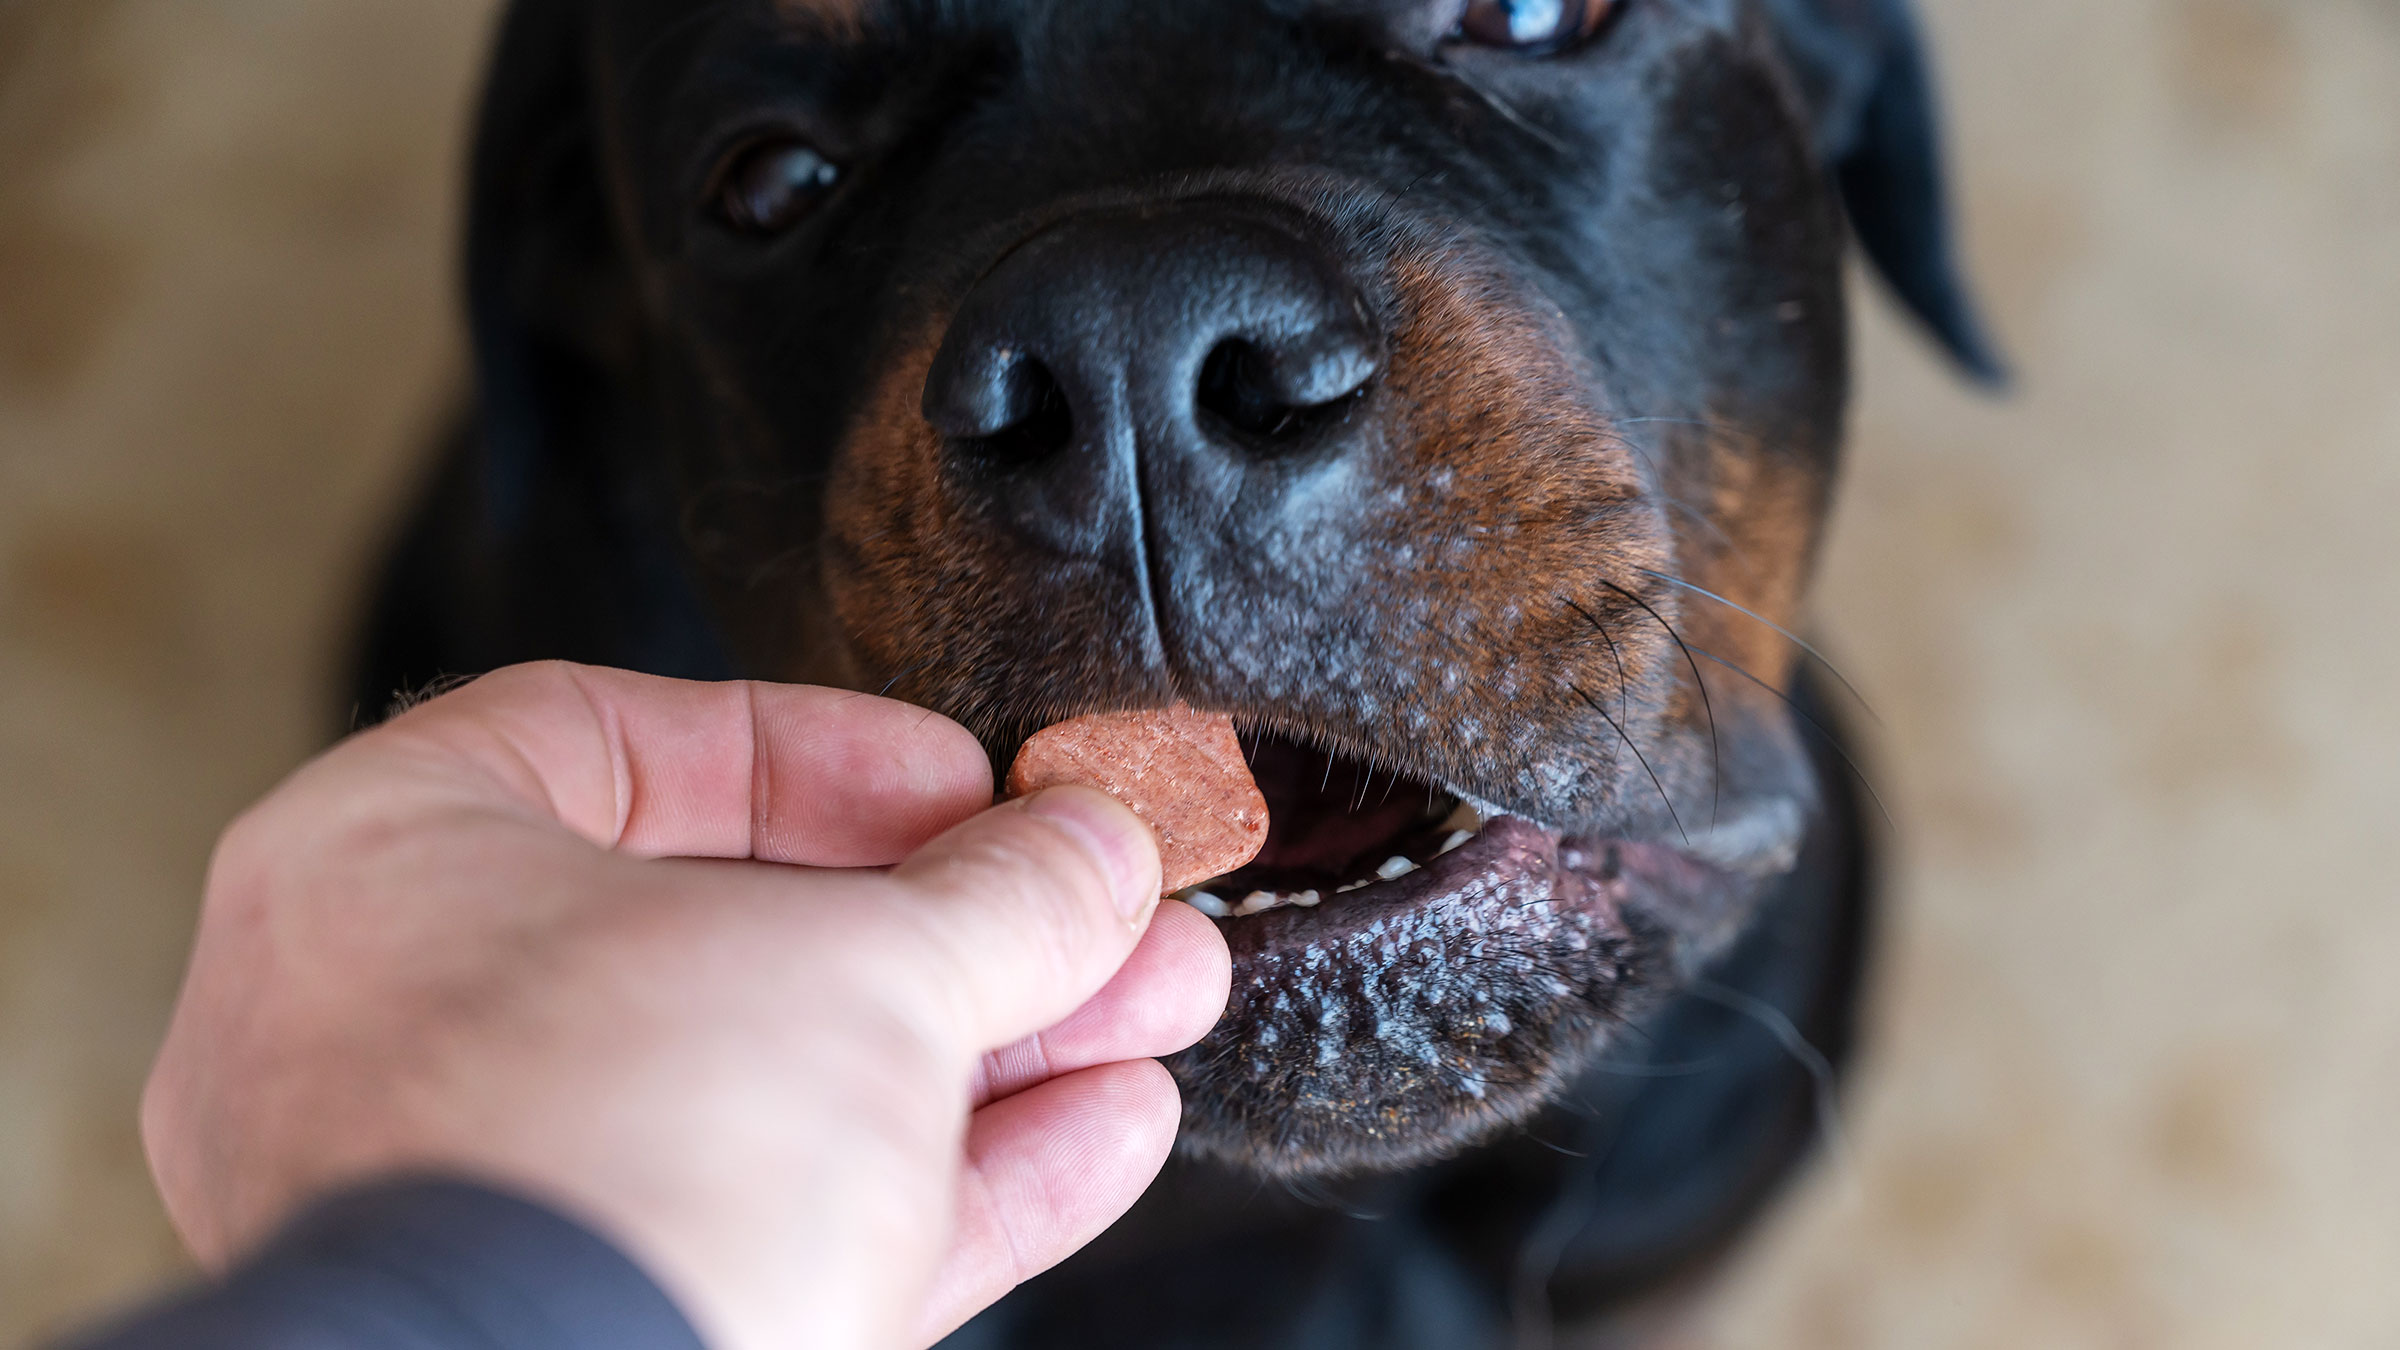 https://images.ctfassets.net/4f3rgqwzdznj/2I9hZNK9KEOQD4BekV3v5g/40fd309d7bf2d913da43ceae77b3a054/closeup_dog_eating_chewable_tablet_1396708723.jpg